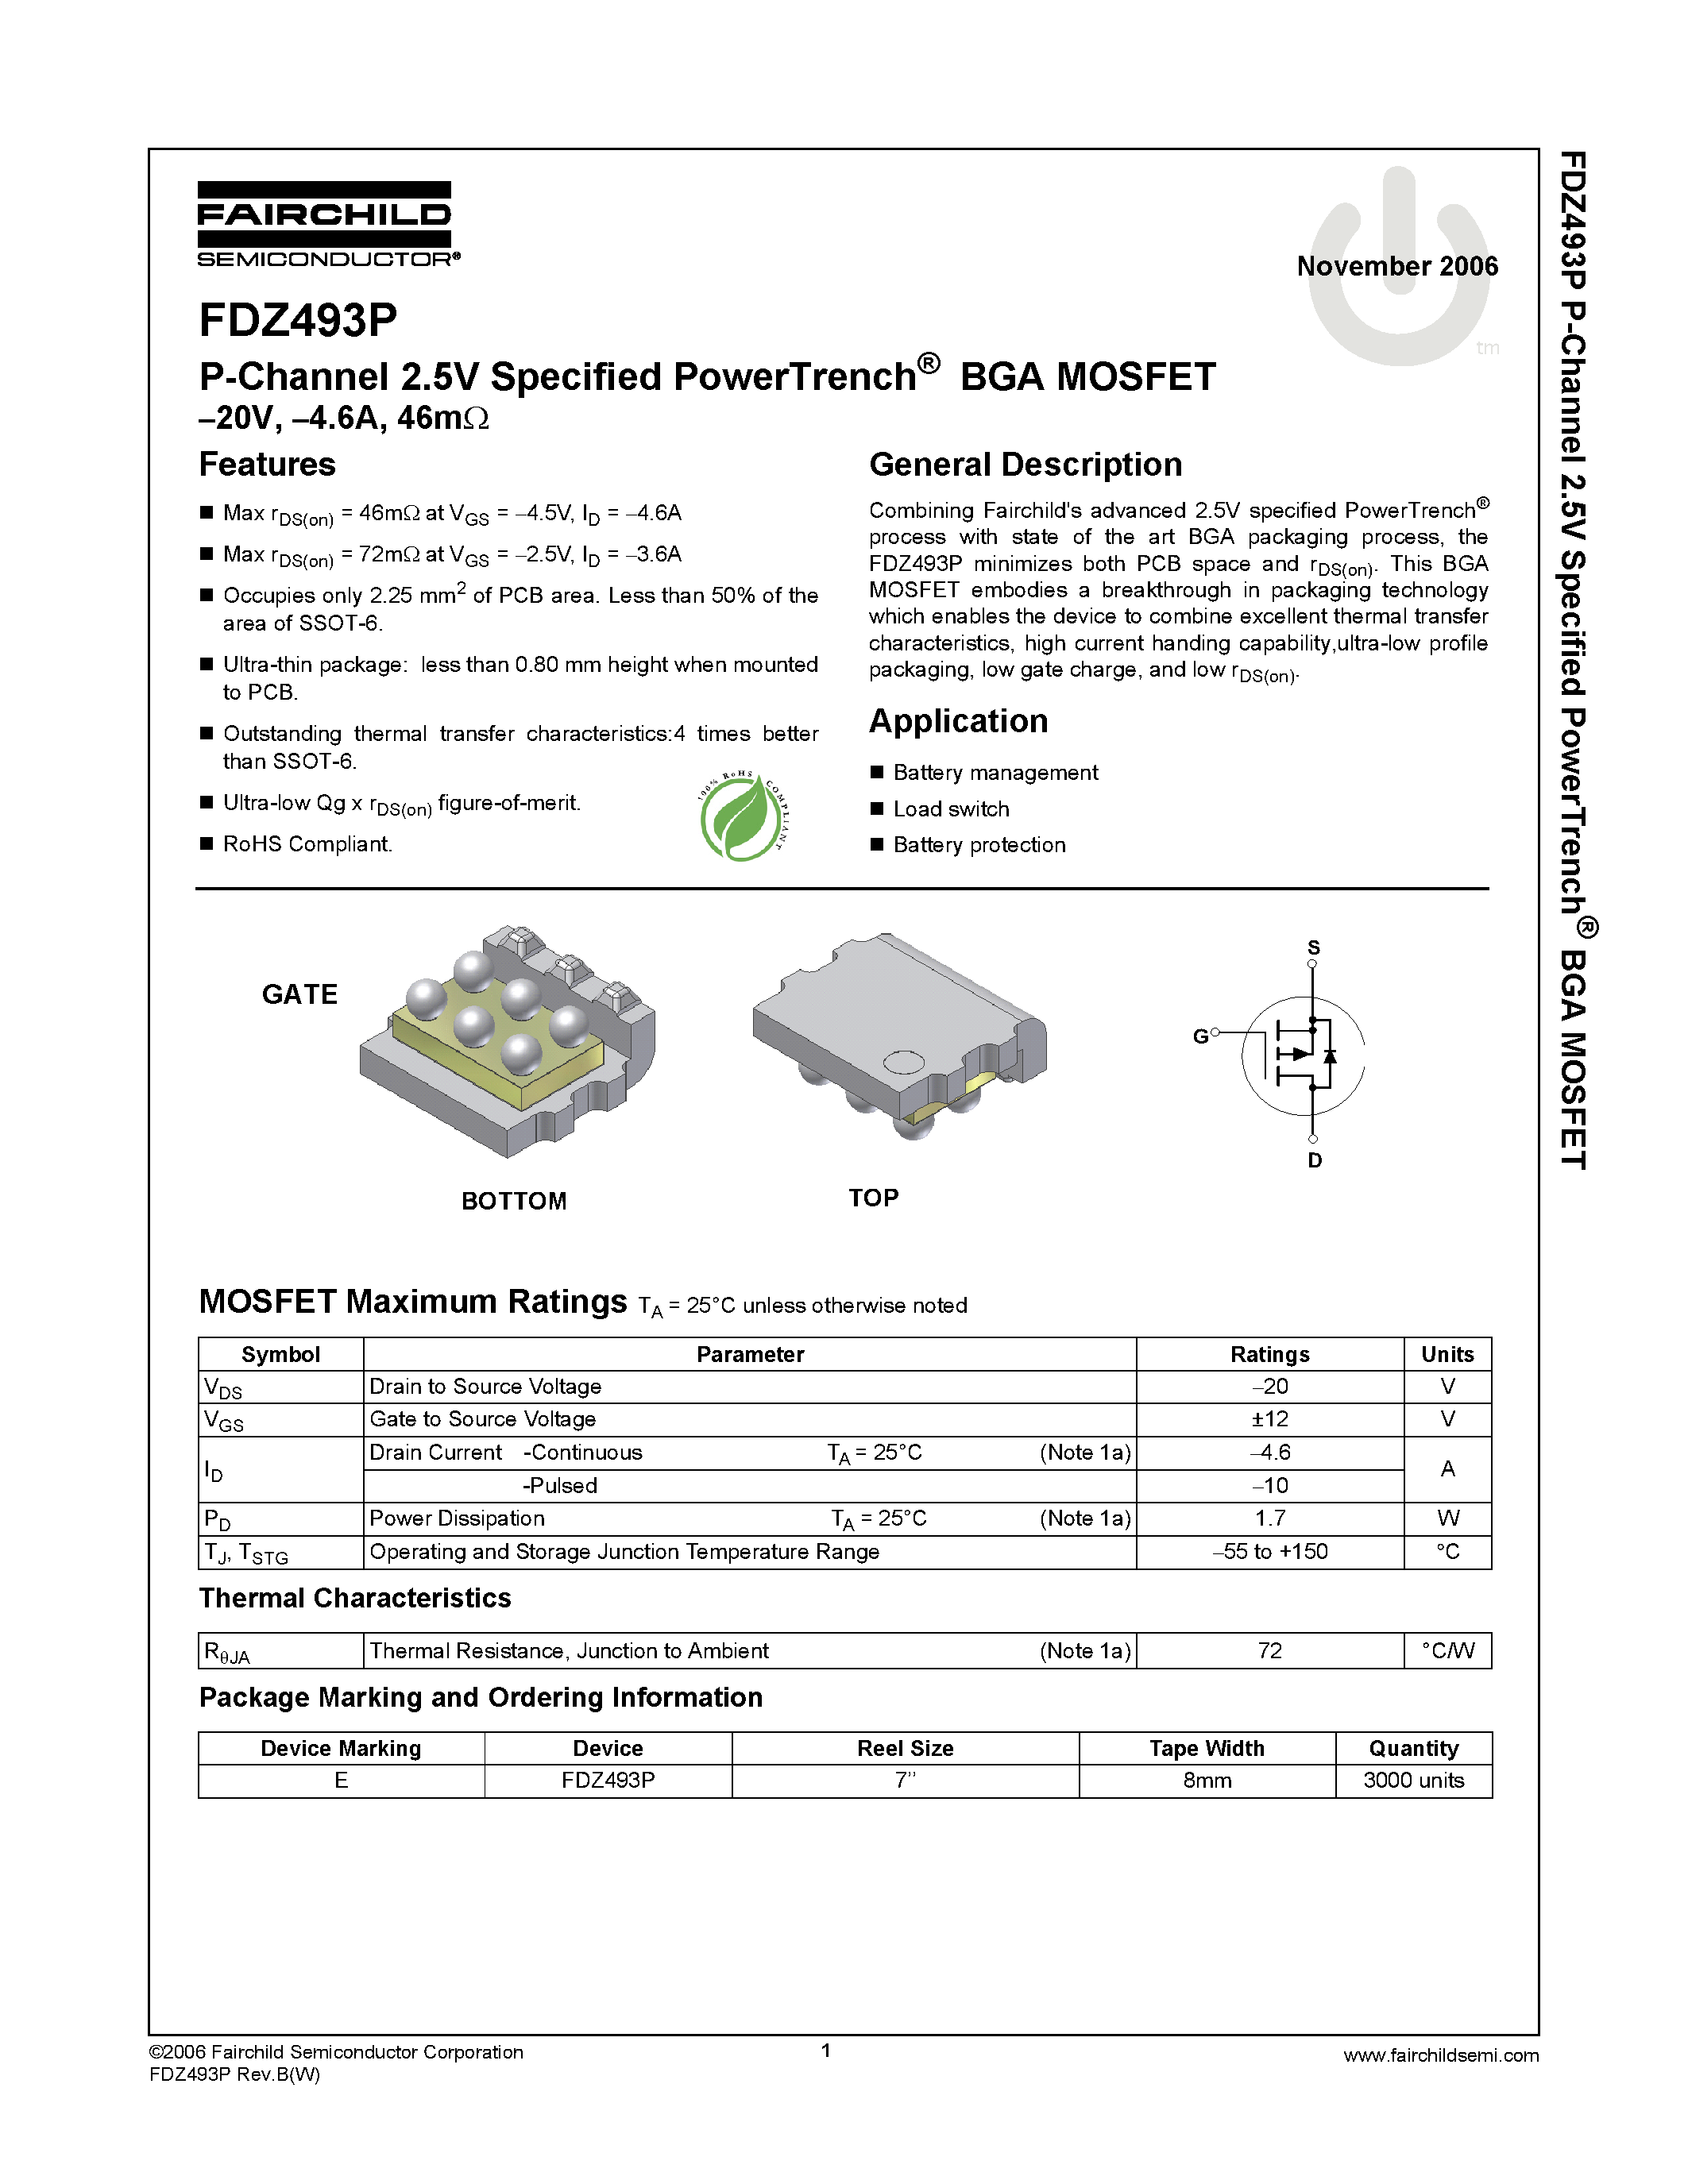 Даташит FDZ493P - P-Channel 2.5V Specified PowerTrench BGA MOSFET страница 1